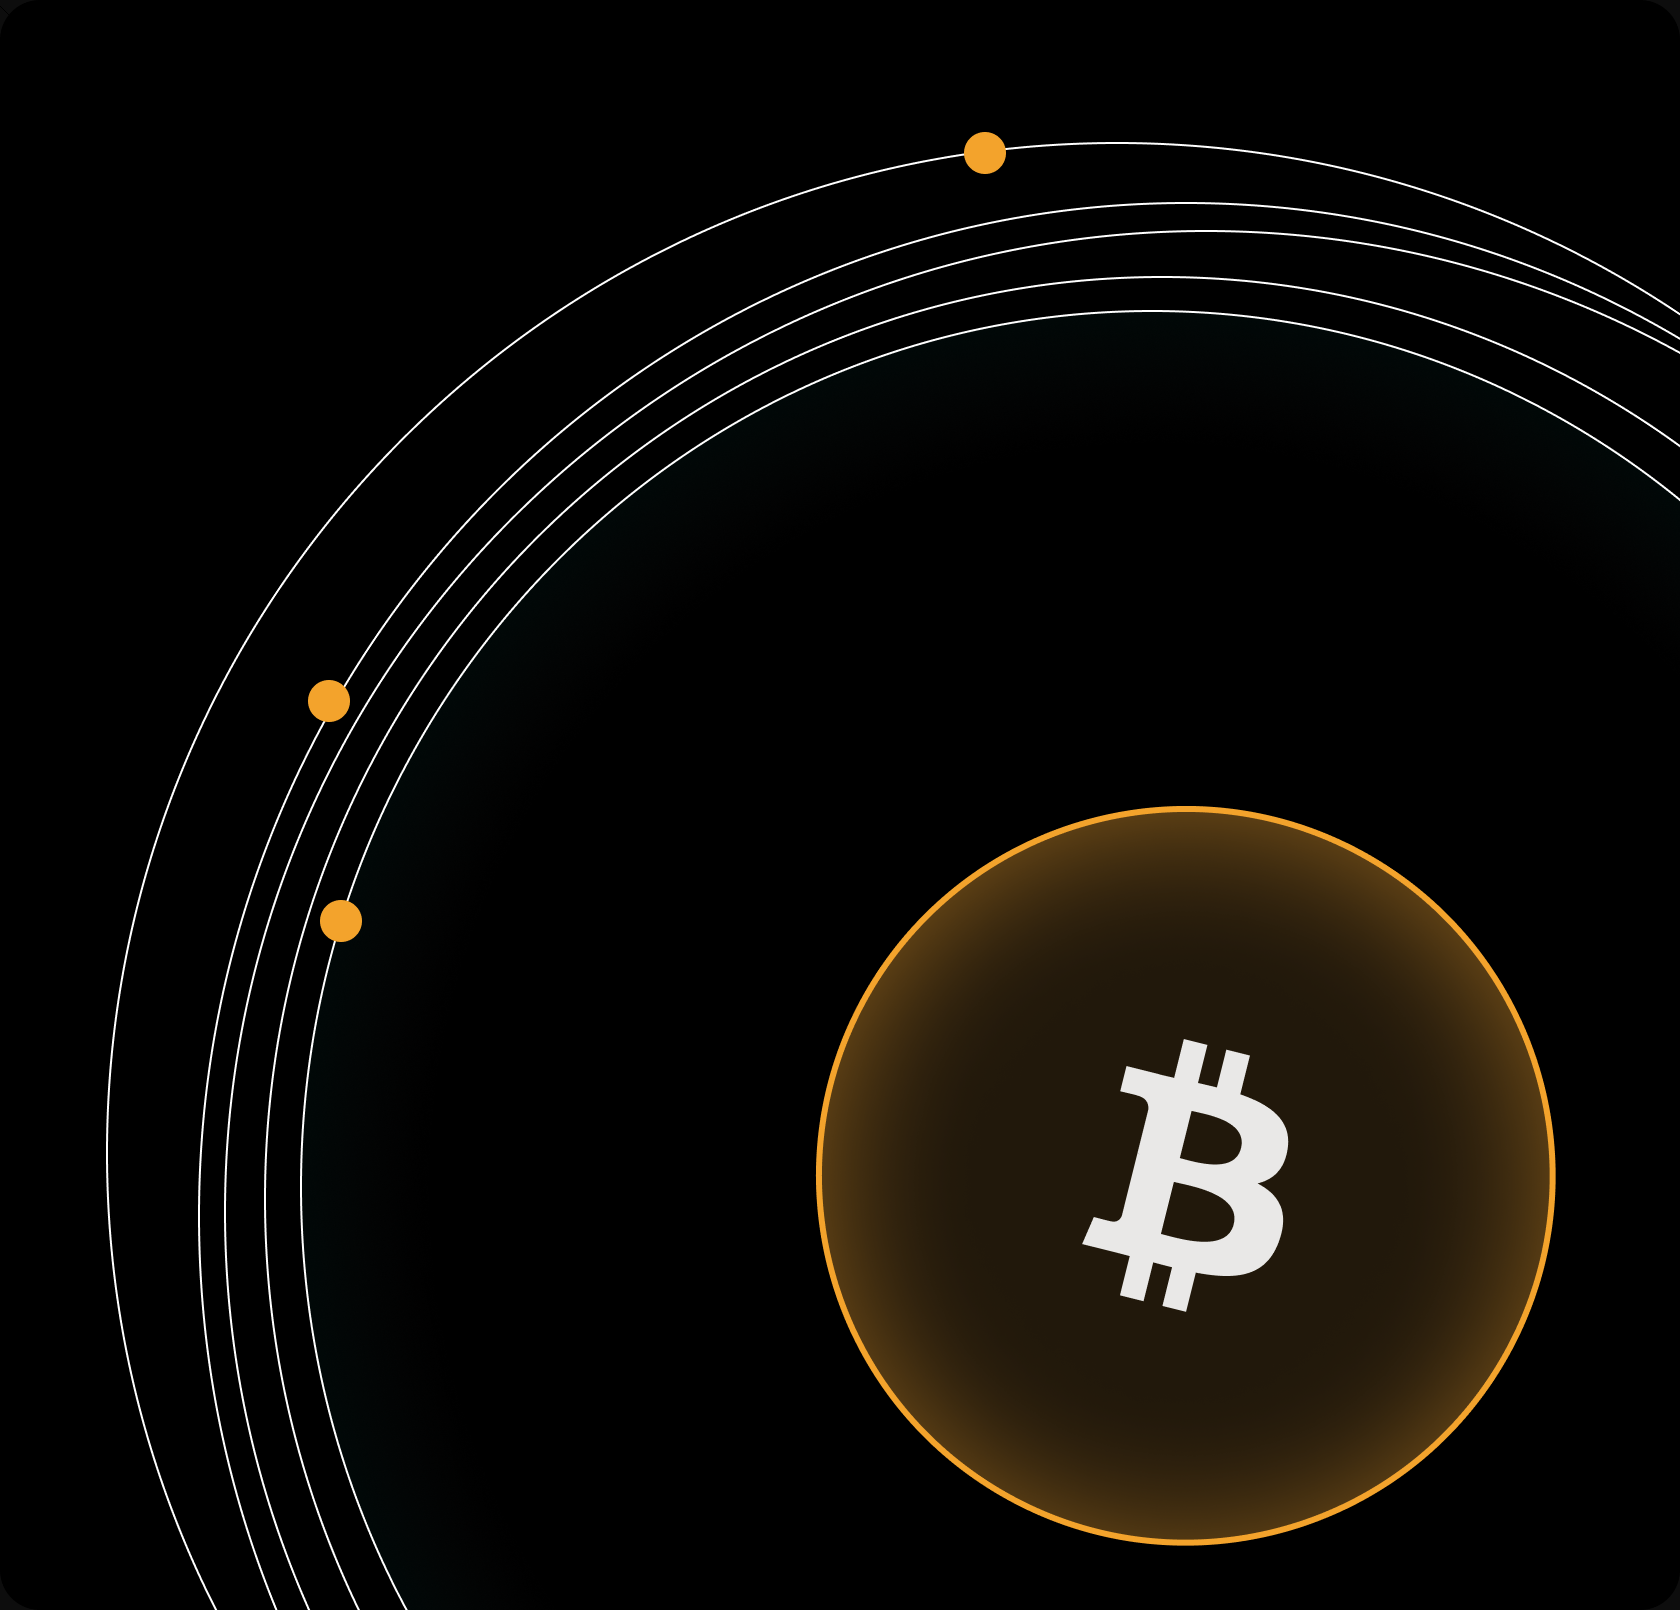 Bitcoin symbol as a planet with orange dots orbiting around it